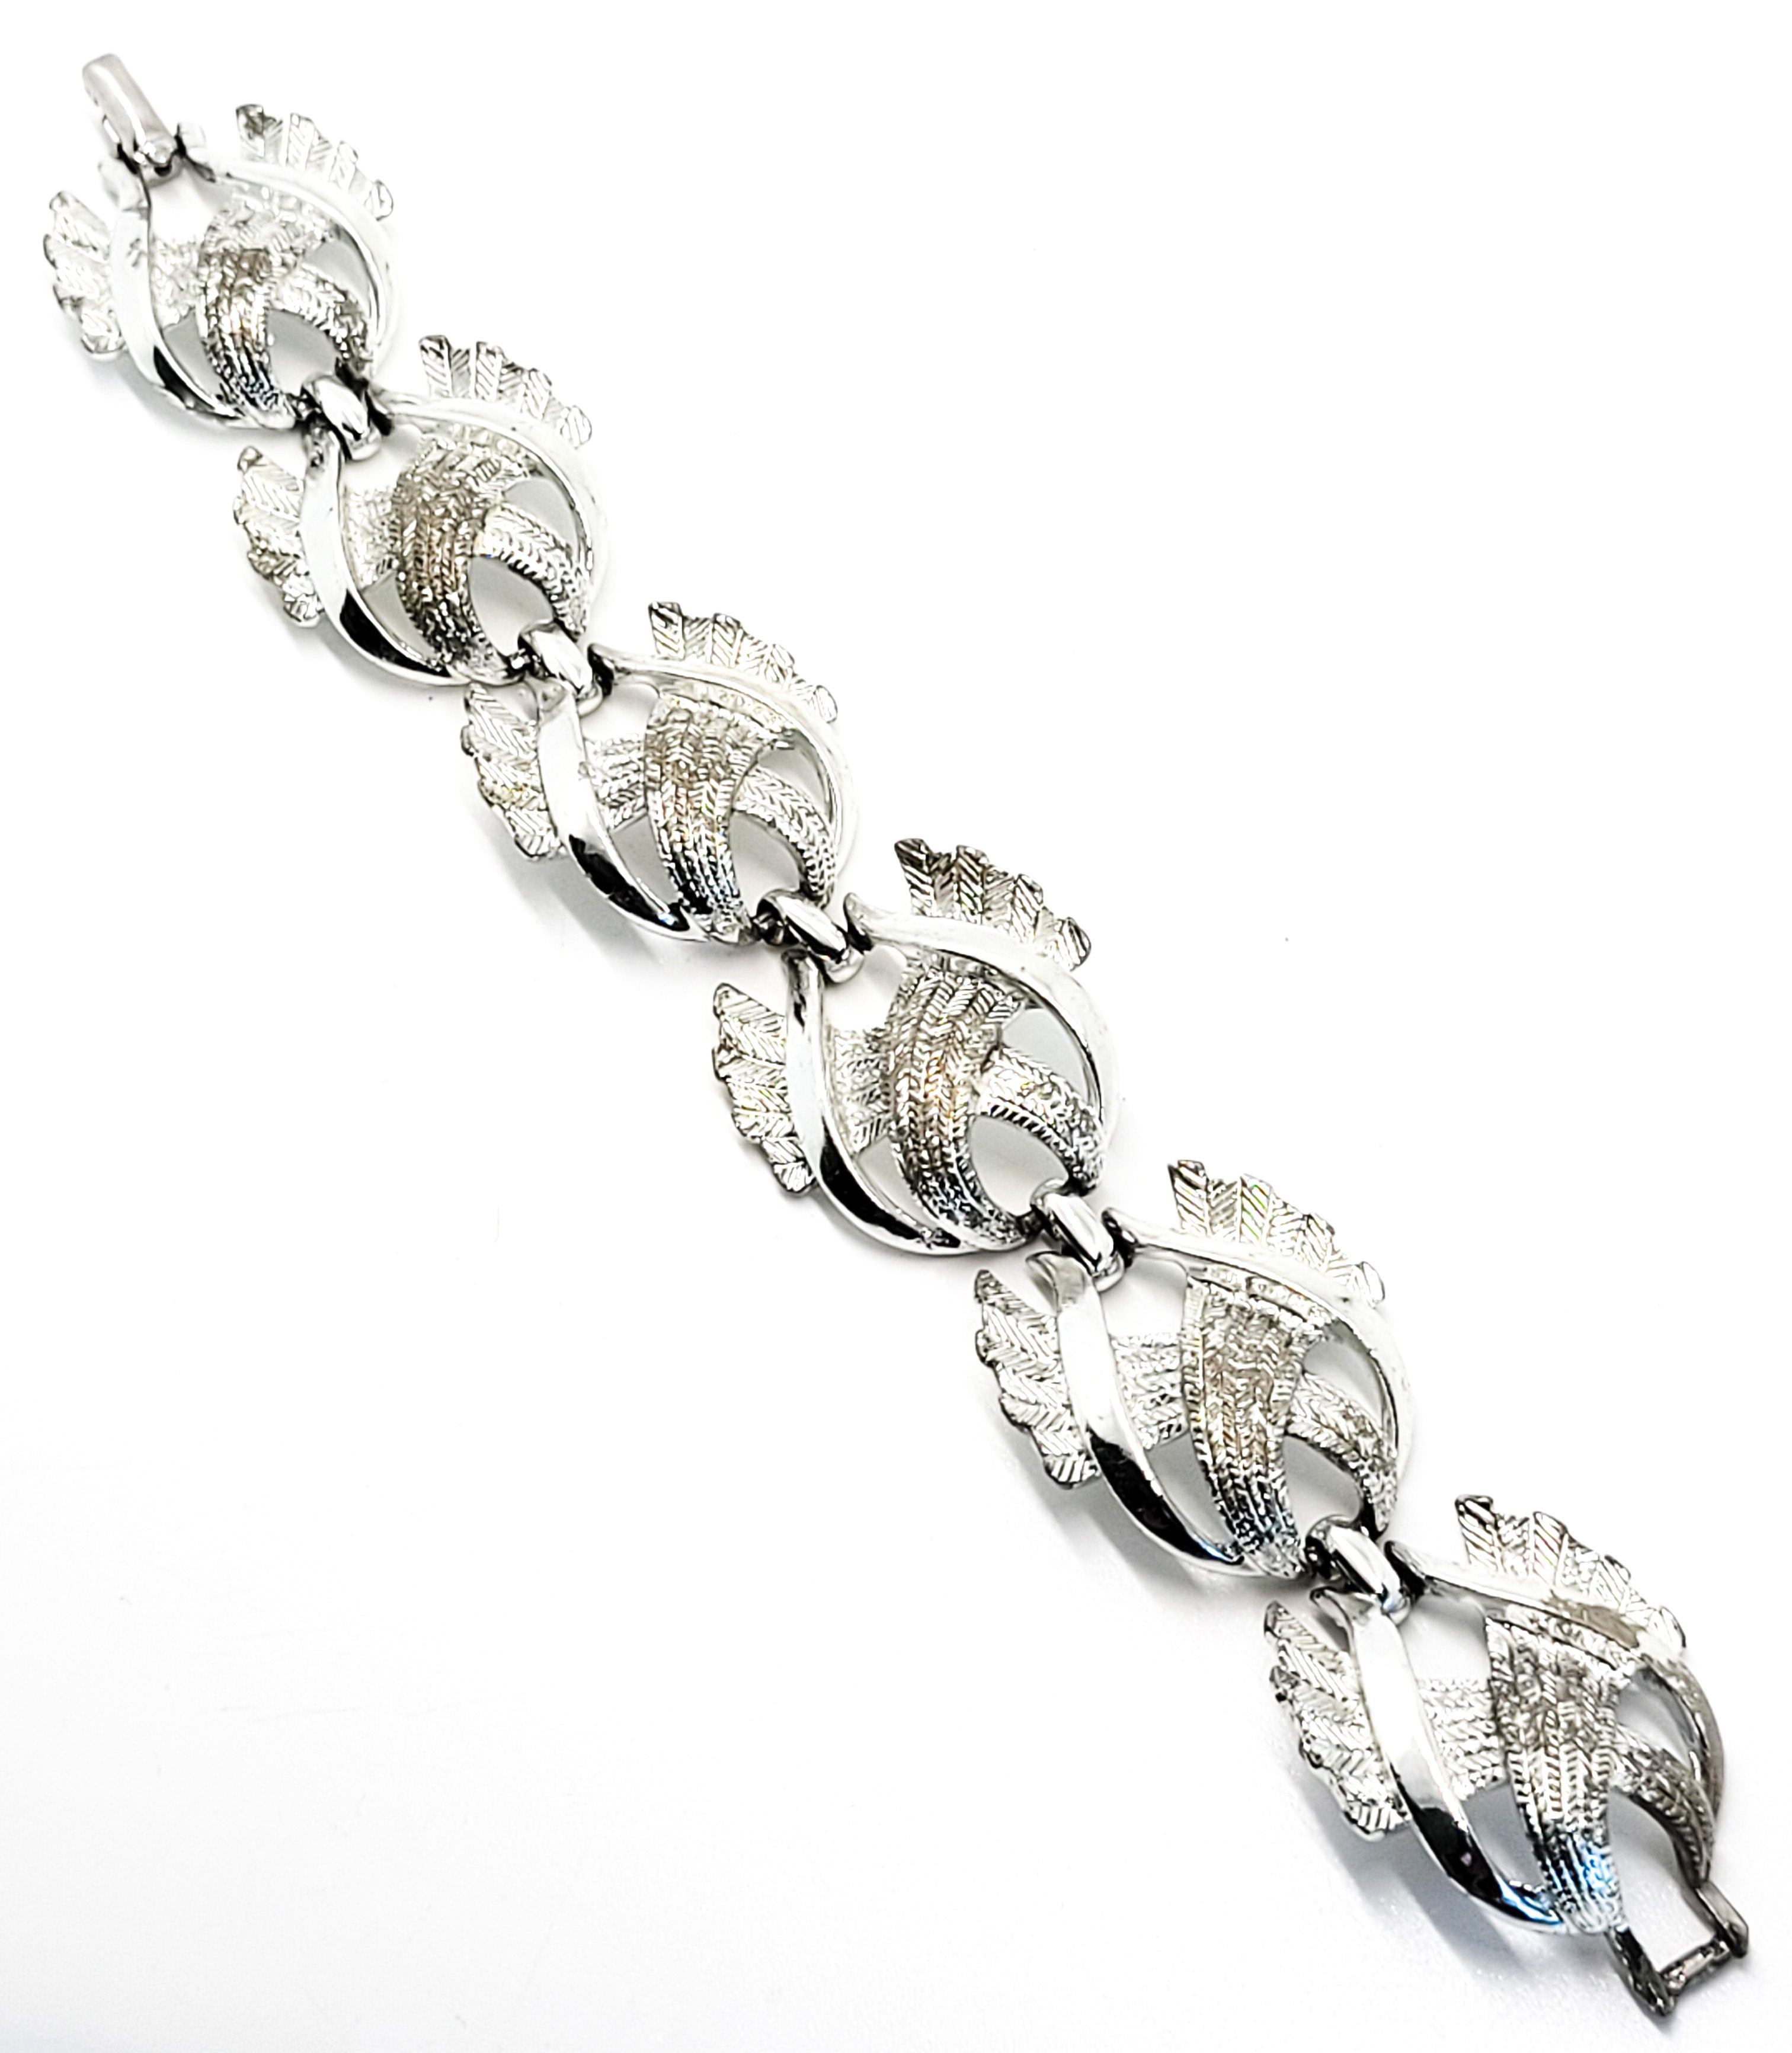 Coro signed silver plated vintage open work tennis bracelet mid 